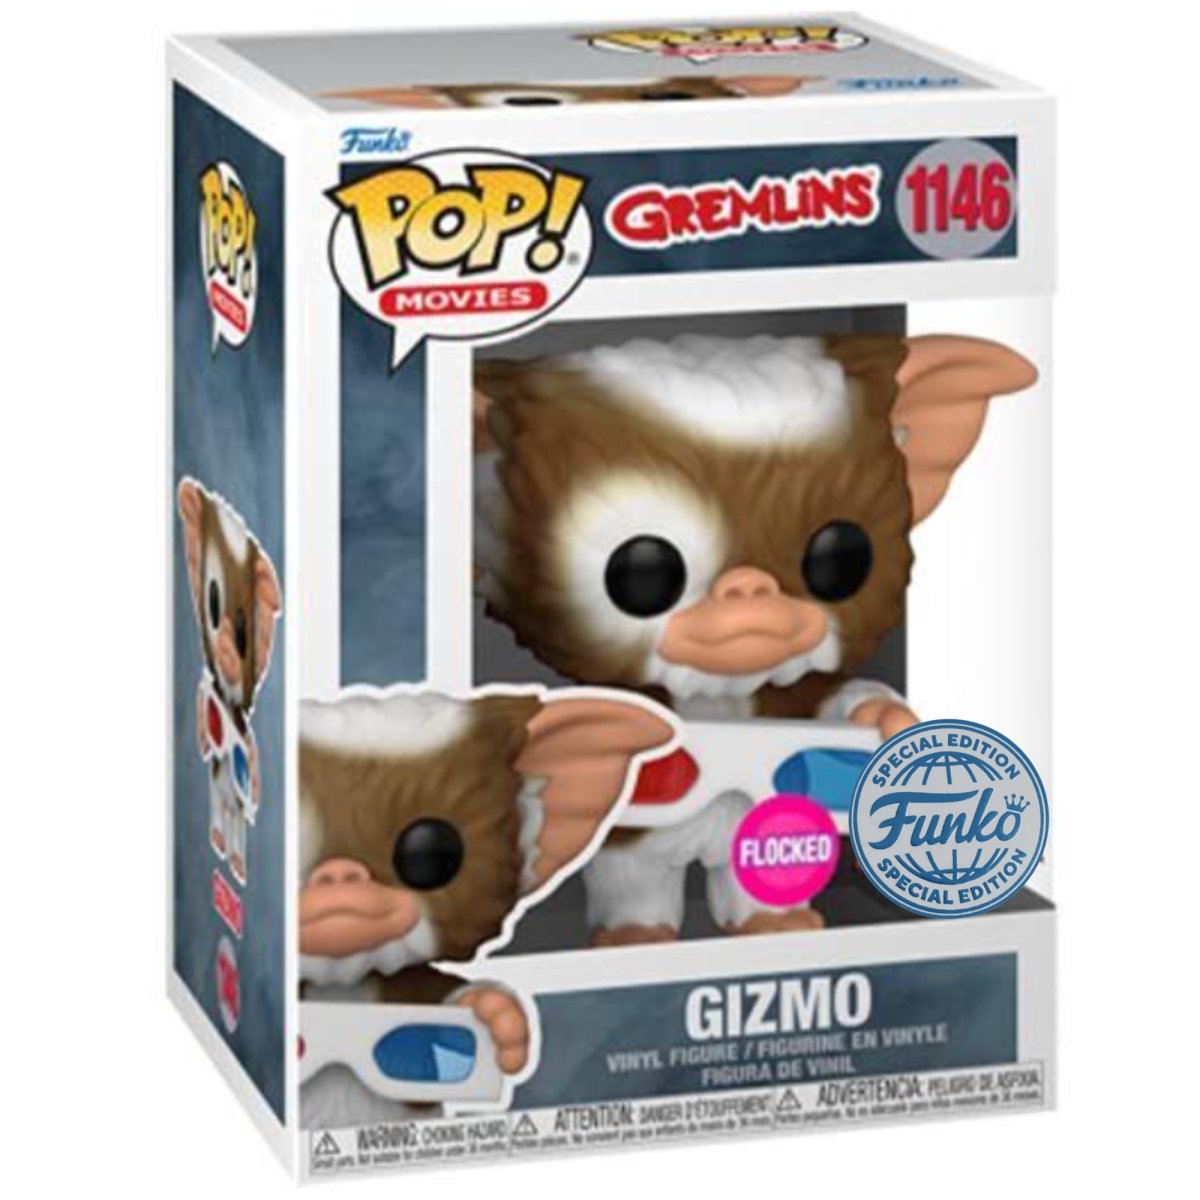 Gremlins - Gizmo [with 3D Glasses] (Flocked Special Editiion) #1146 - Funko Pop! Vinyl Movies - Persona Toys